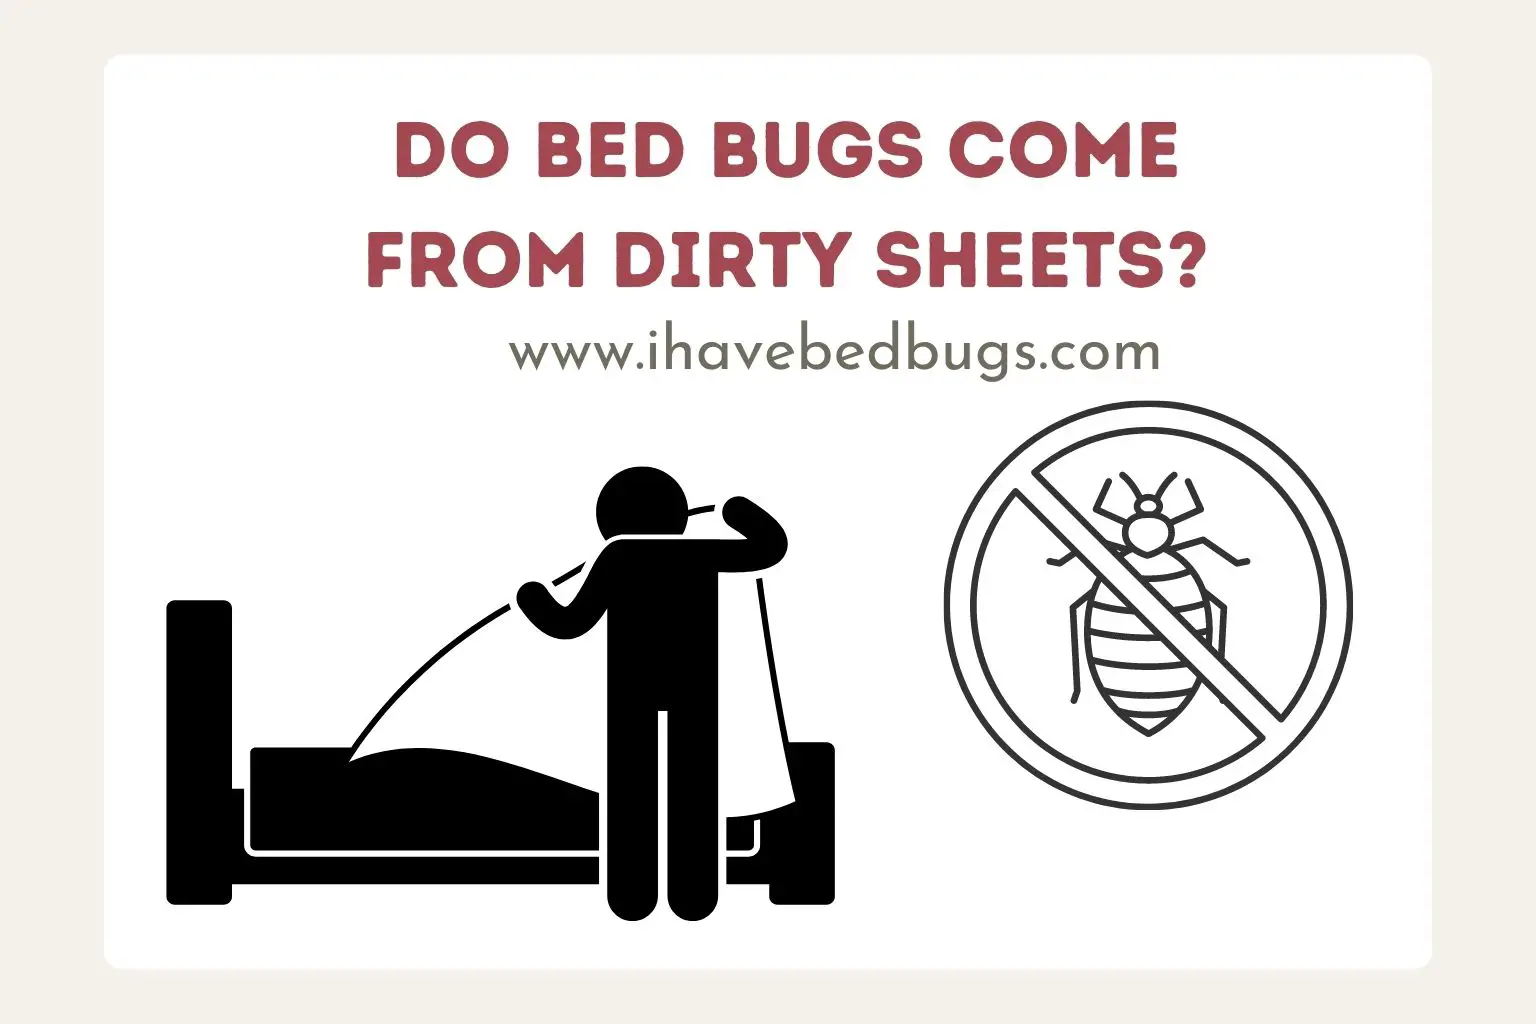 Do bed bugs come from dirty sheets